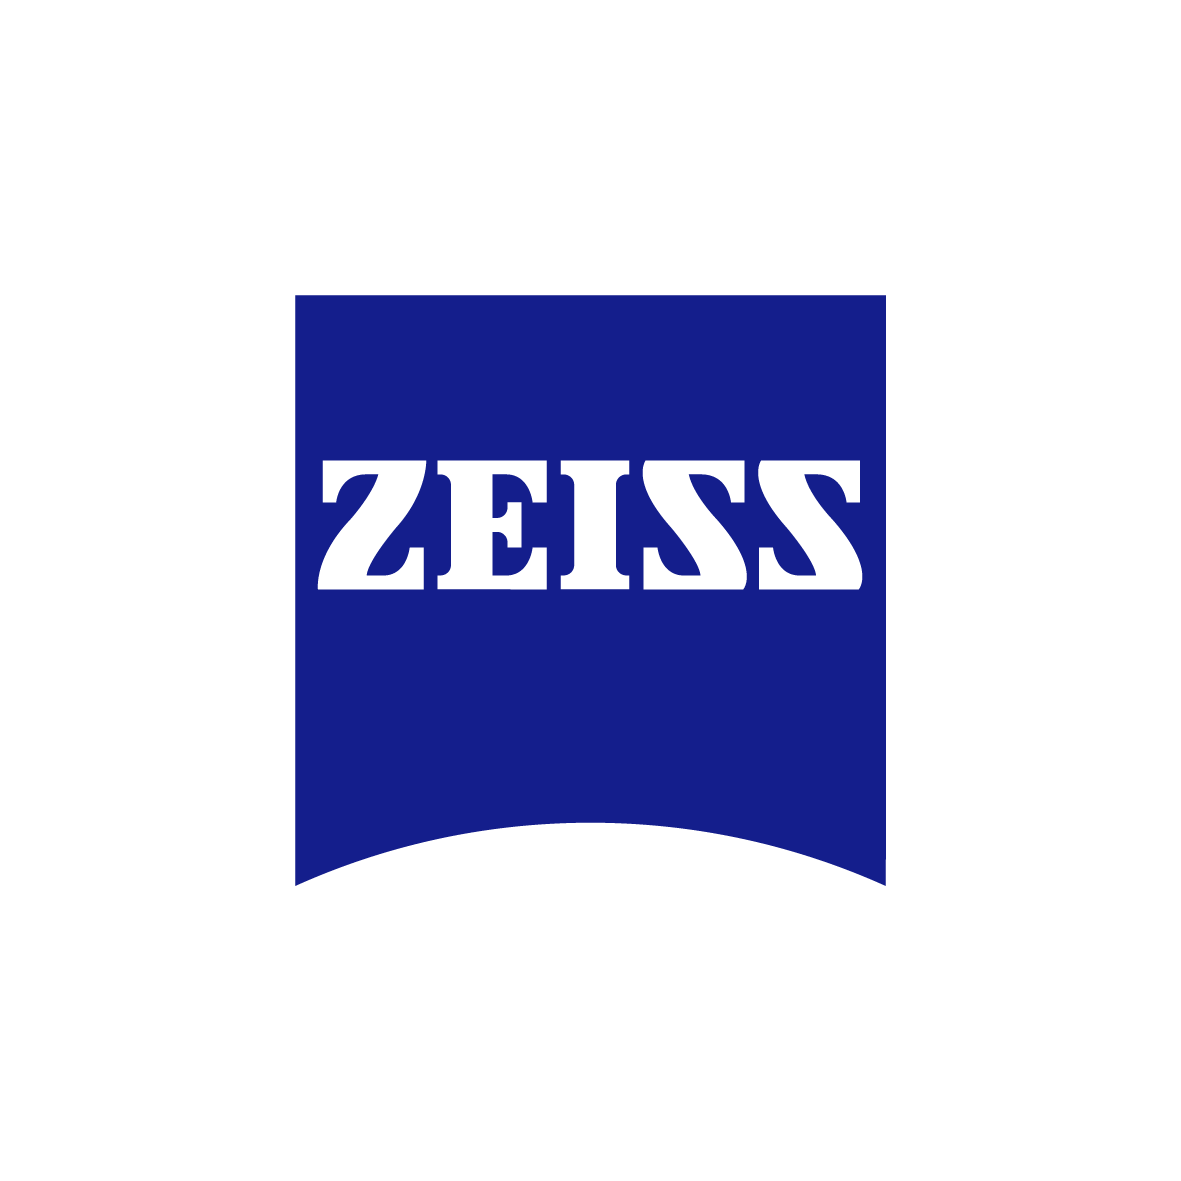 2022-03/zeiss_logo.png